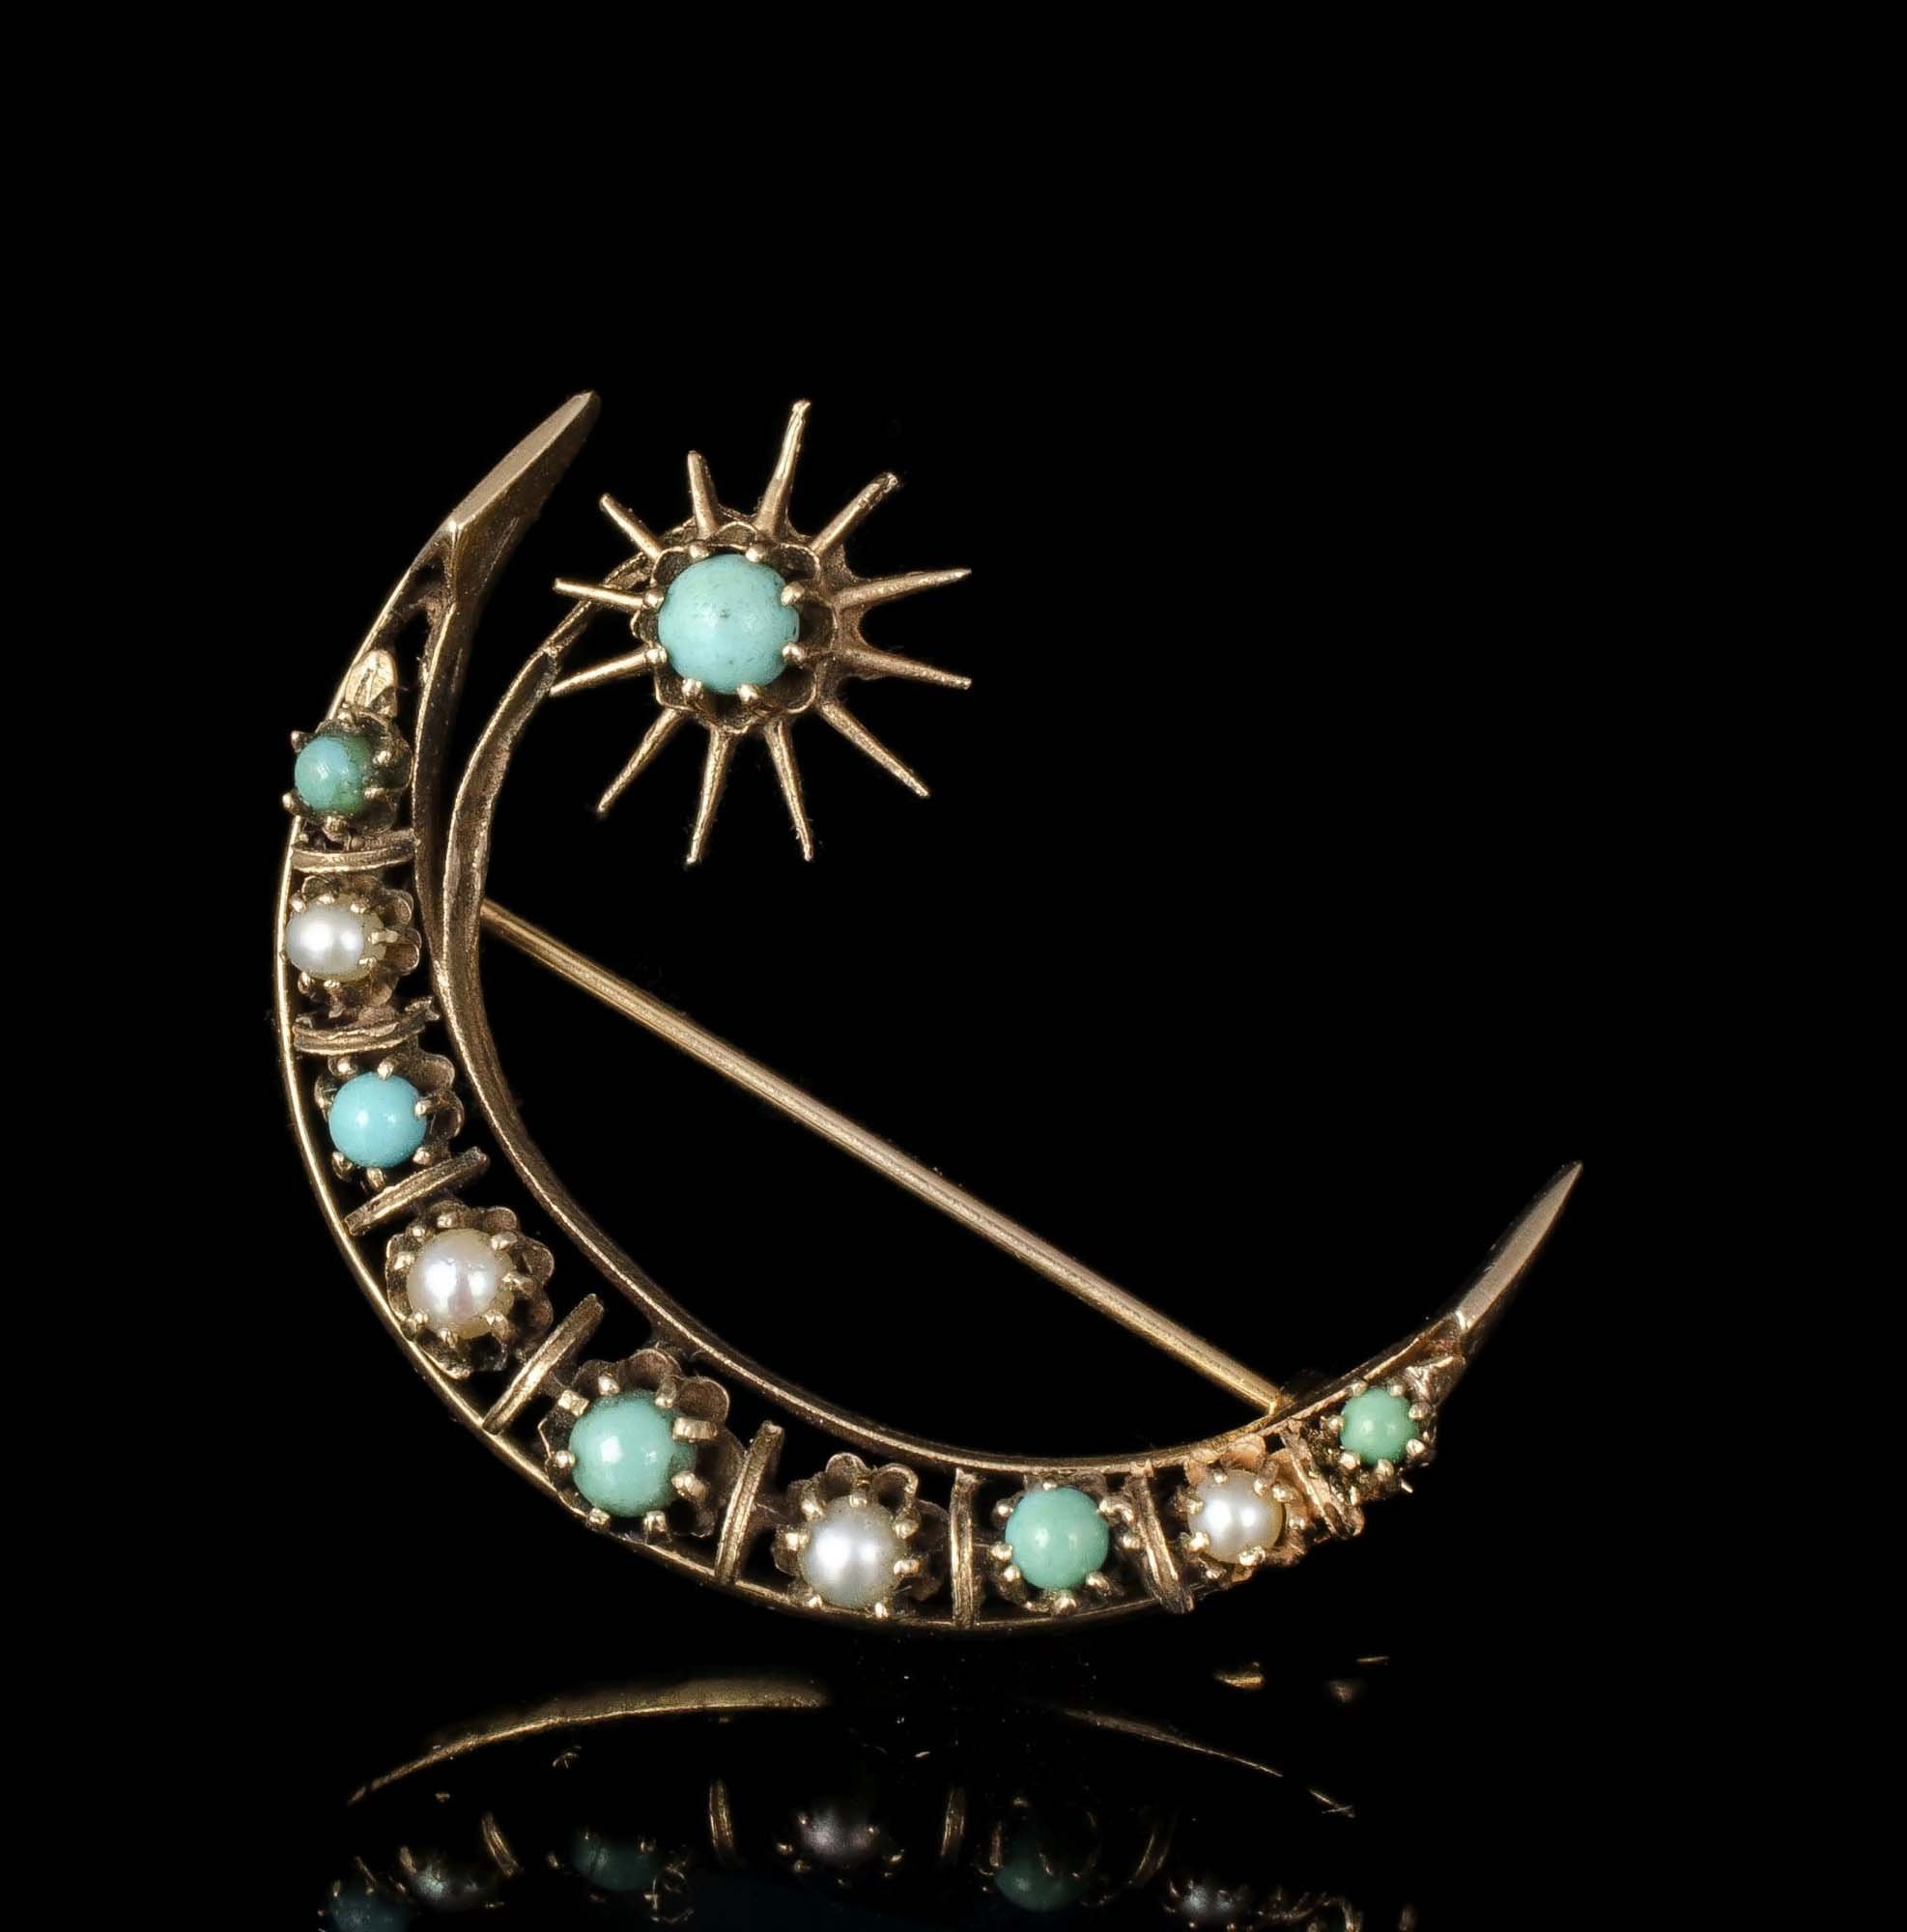 Victorian Revival 14k gold seed pearls and turquoise crescent moon Brooch